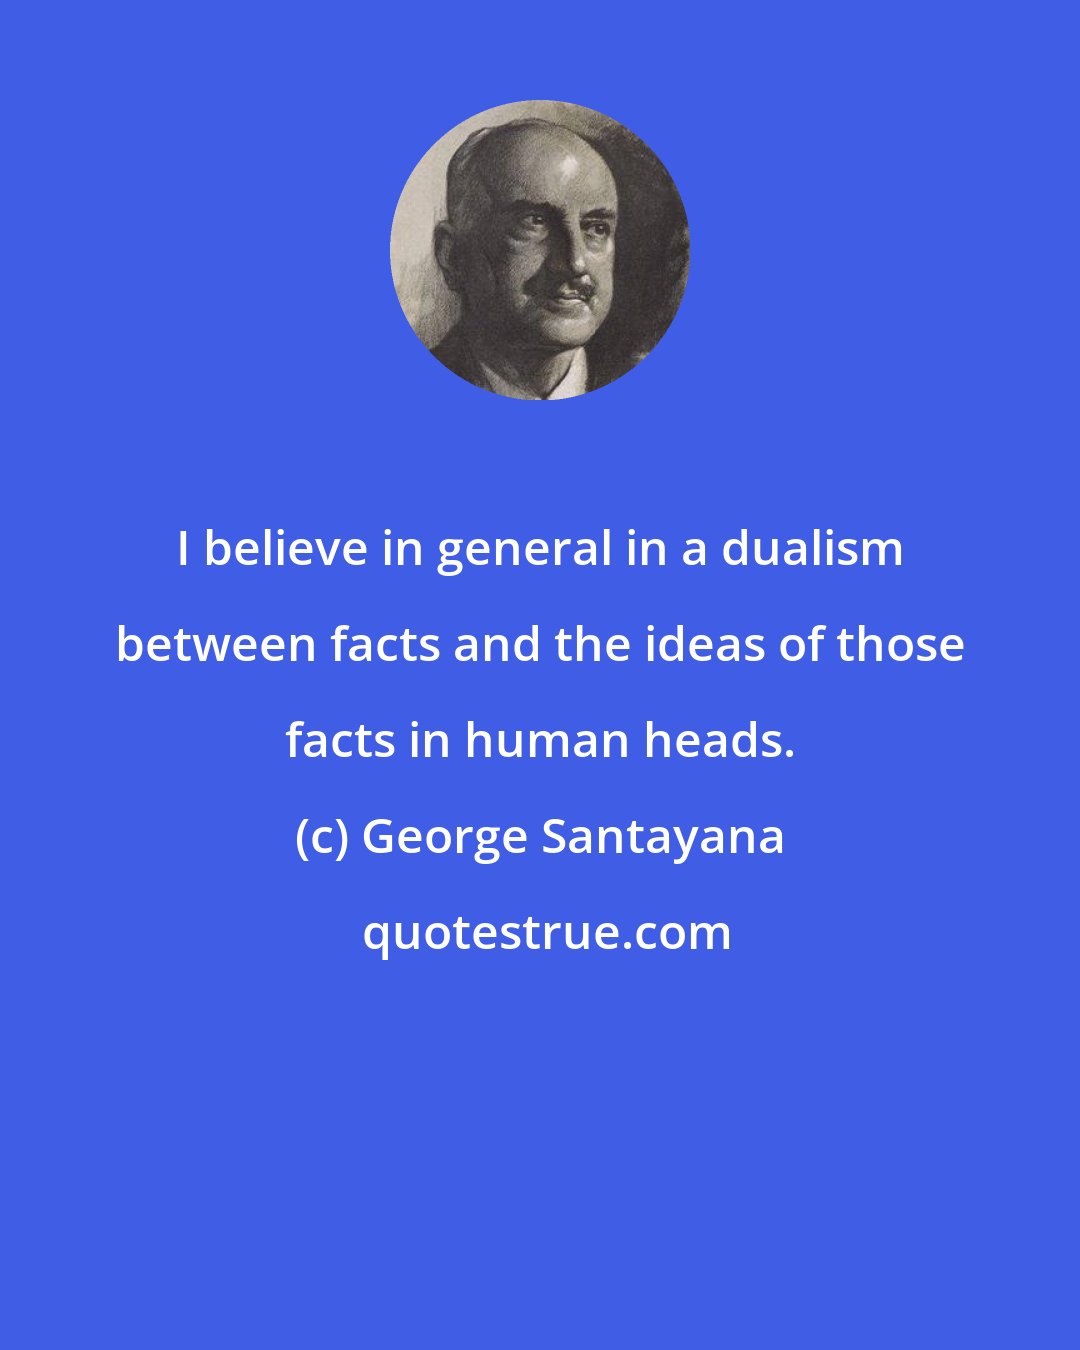 George Santayana: I believe in general in a dualism between facts and the ideas of those facts in human heads.